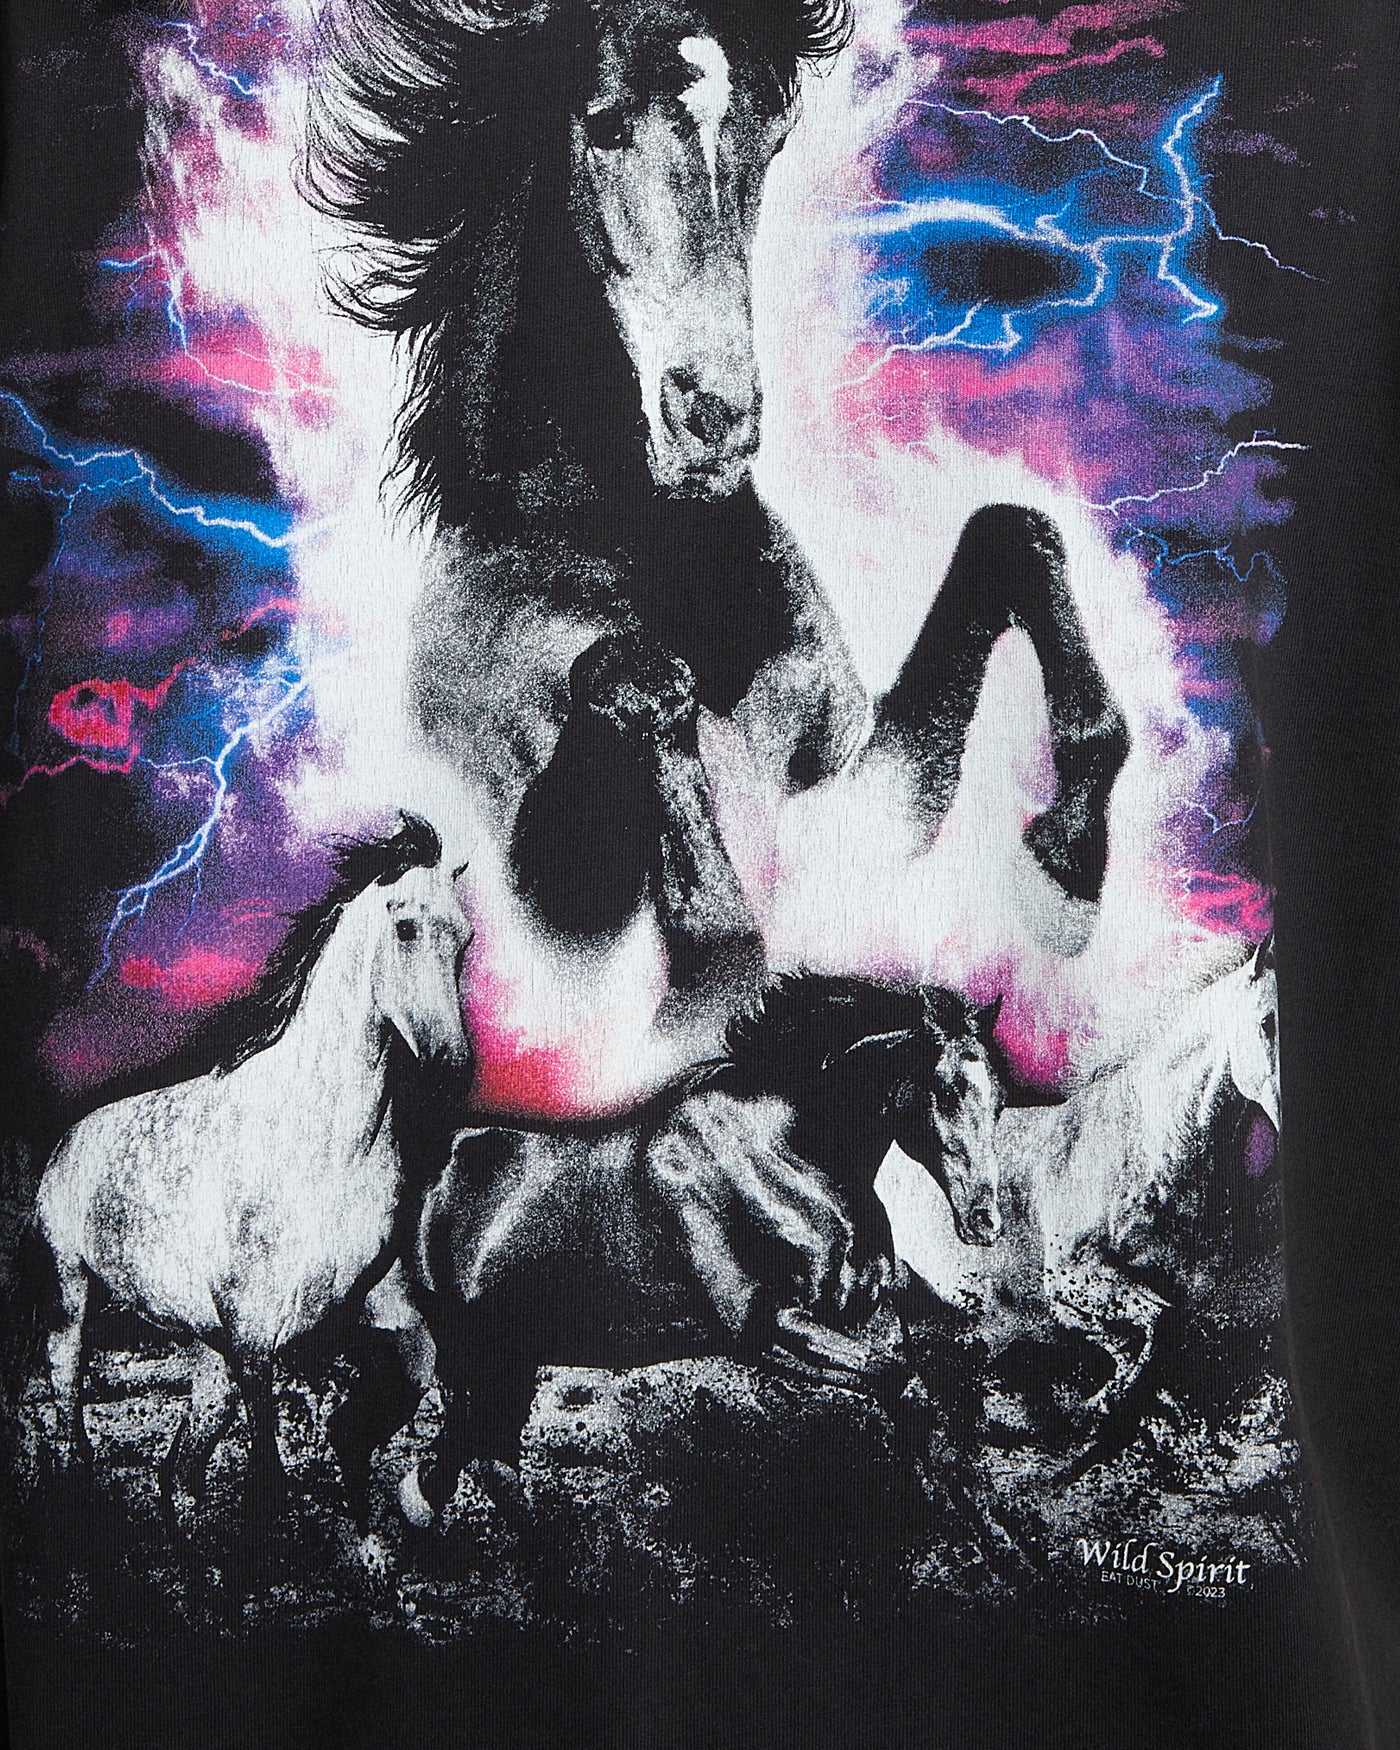 Russell-T Wild Horses Basic Jersey Vintage Black